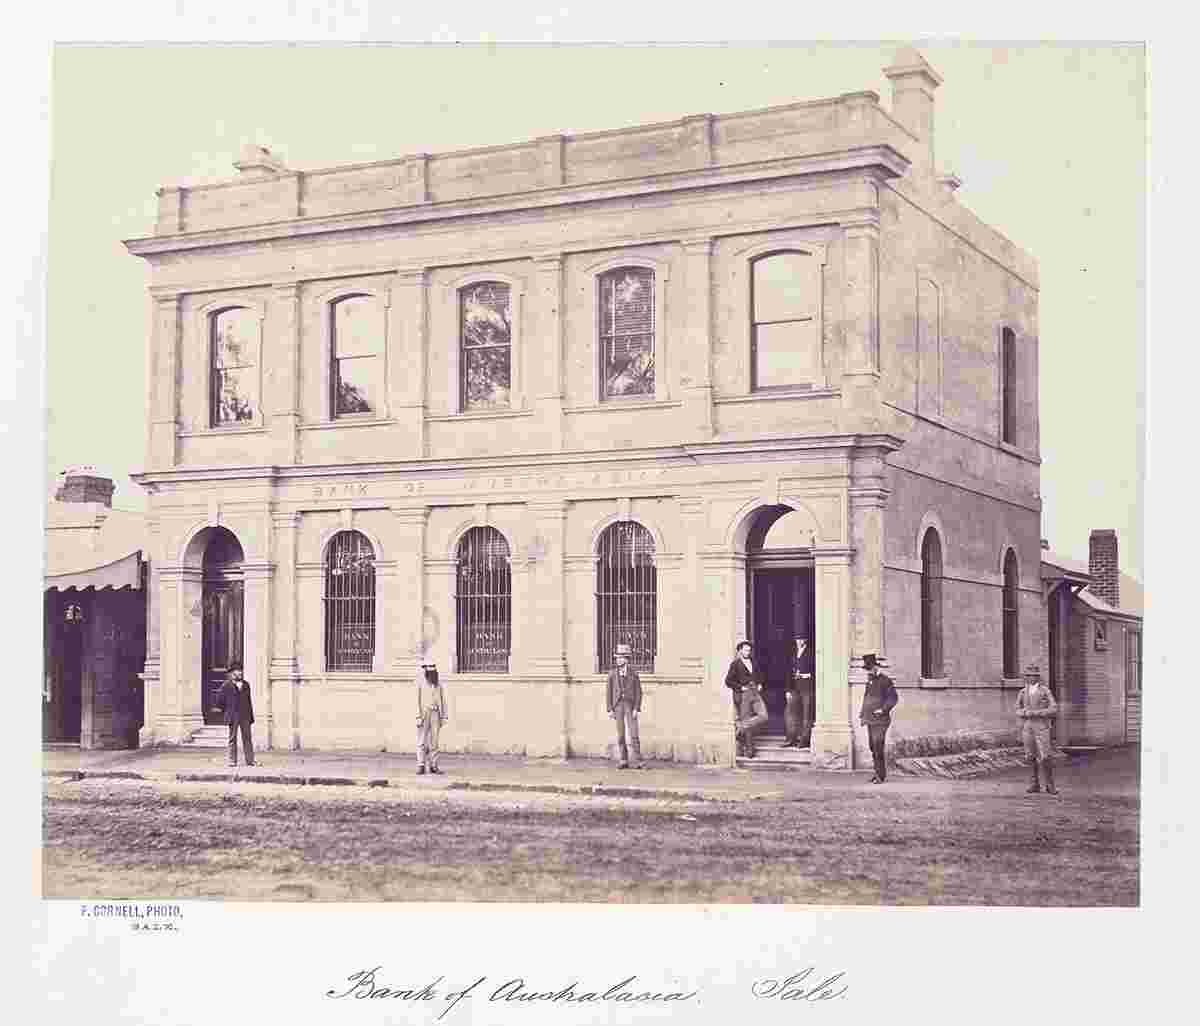 Sale. Bank of Australasia, between 1866 and 1885